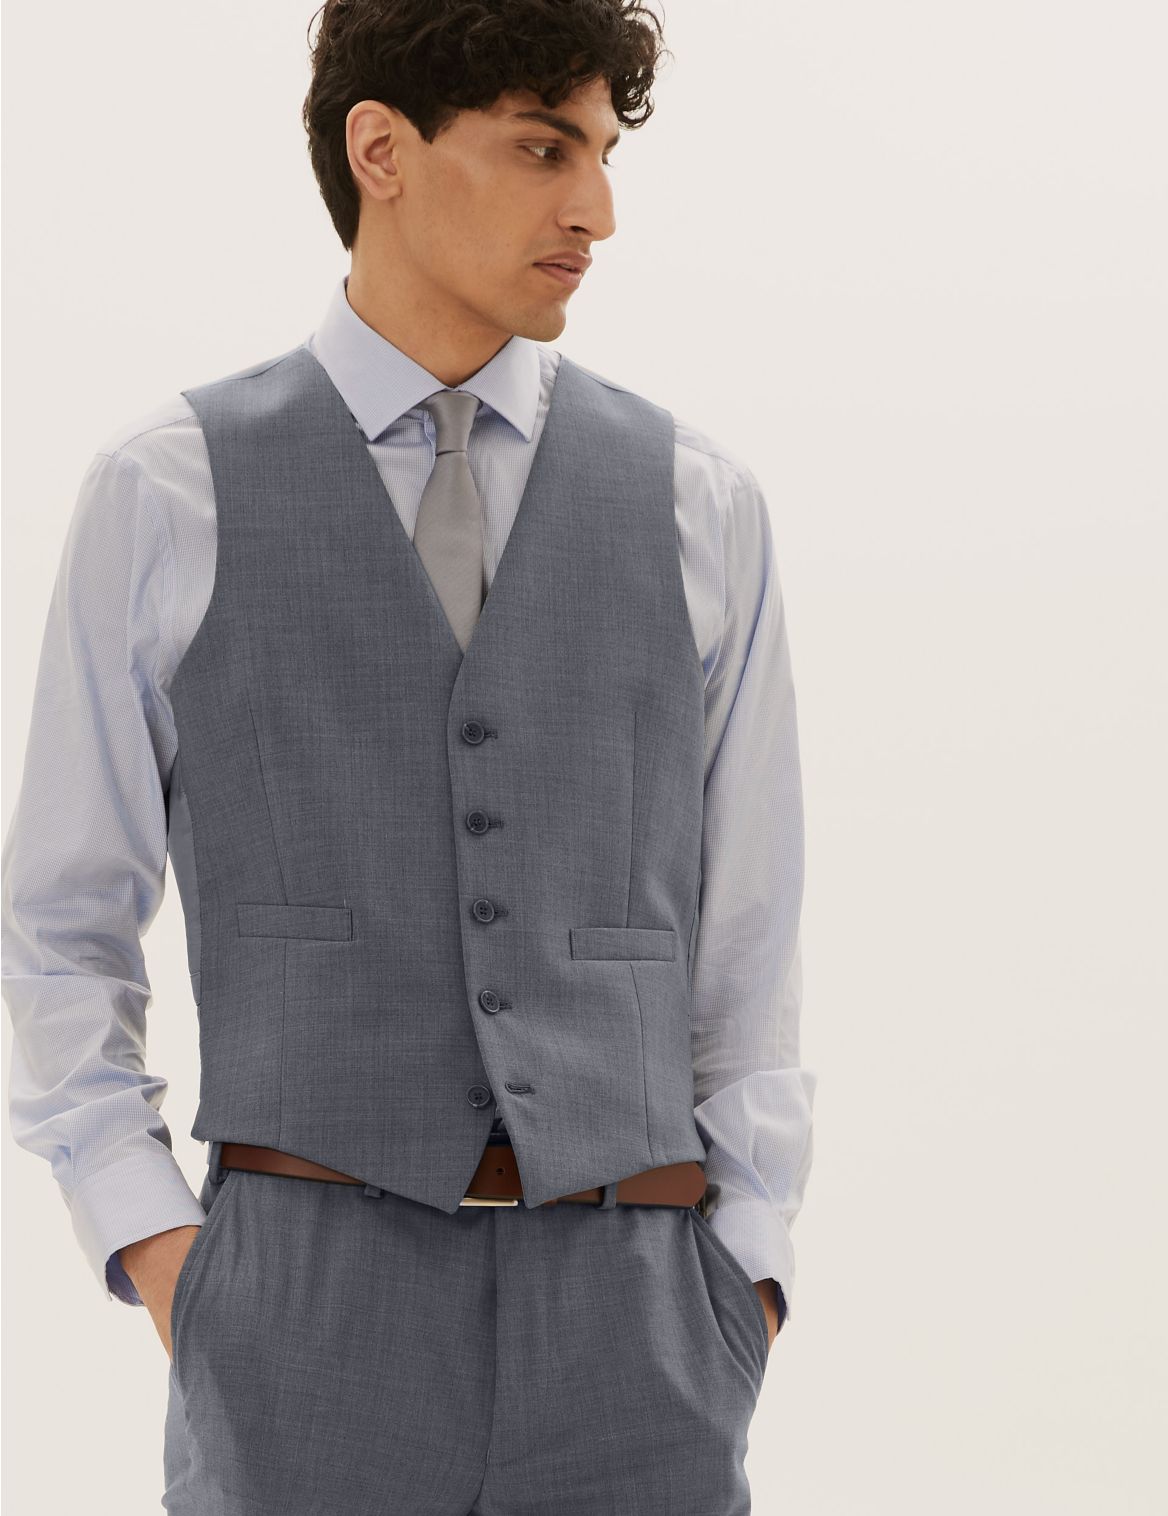 The Ultimate Grey Slim Fit Waistcoat with Stretch grey